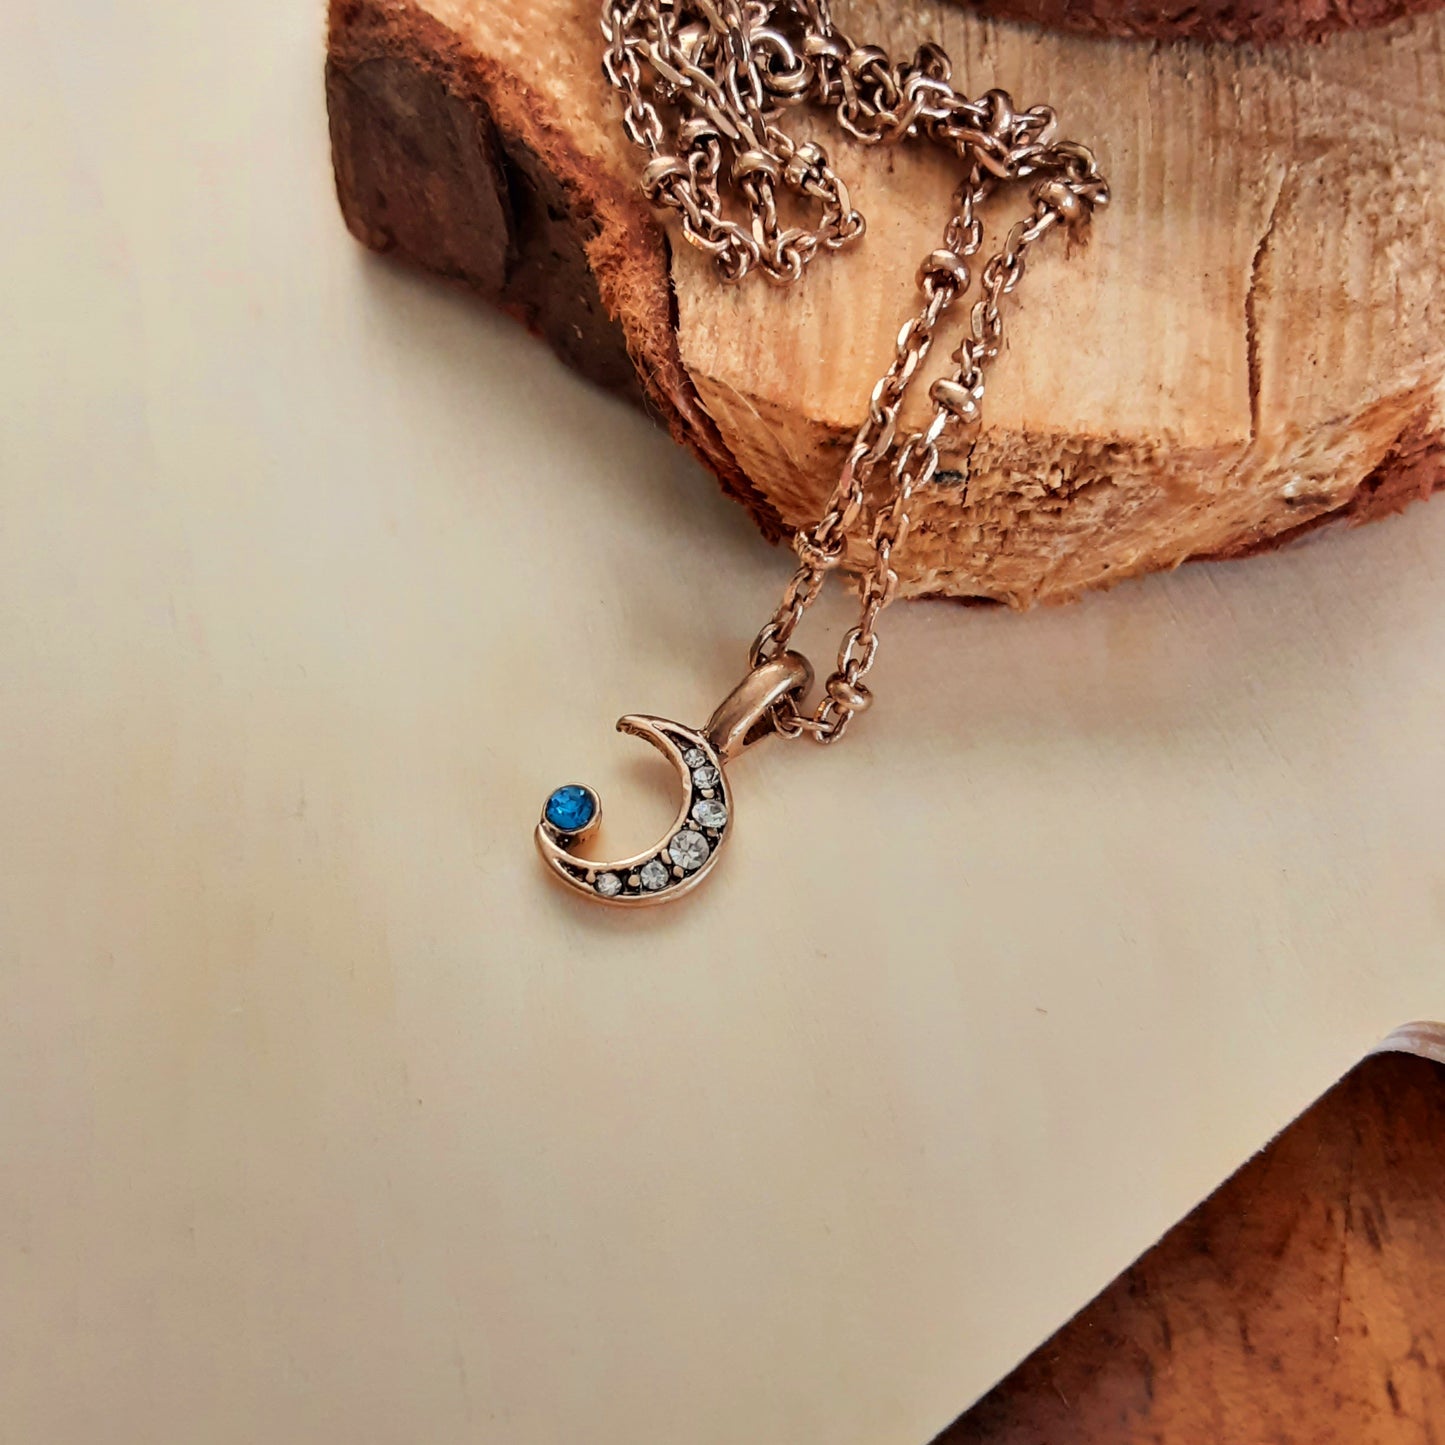 Rhinestone moon necklace with really long chain